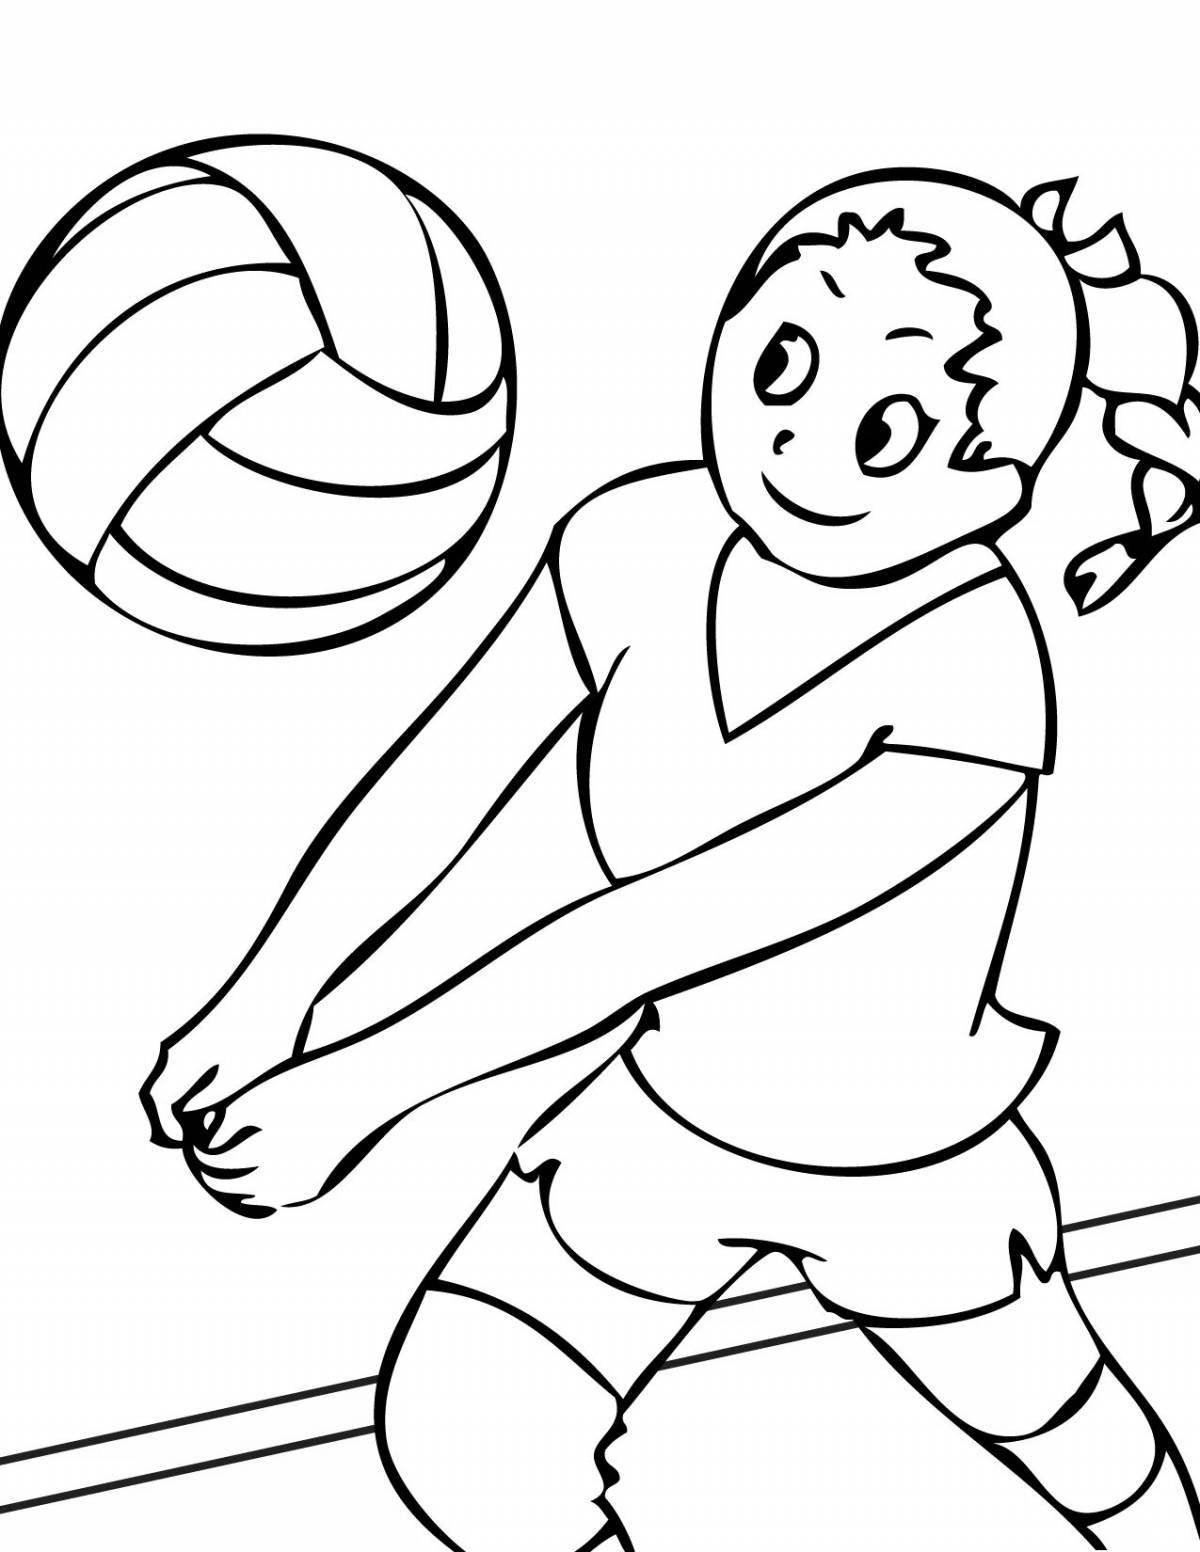 Colorful volleyball coloring book for teenagers